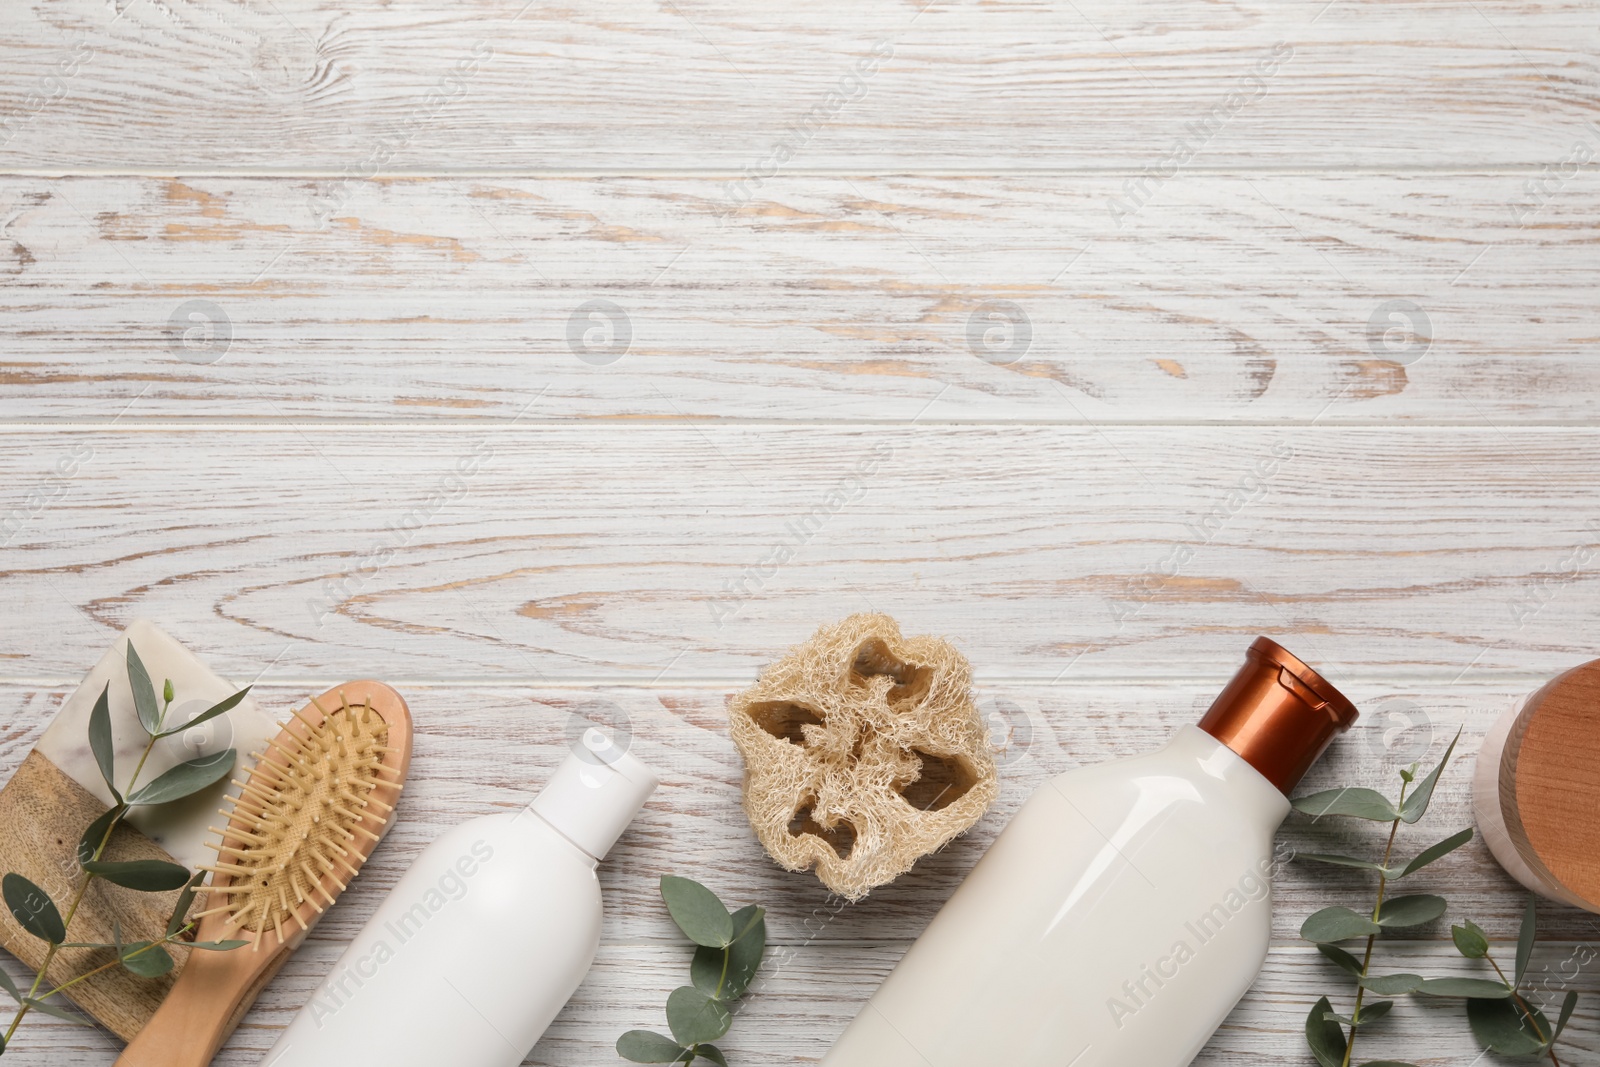 Photo of Shampoo bottles, loofah, hair brush and leaves on white wooden table, flat lay. Space for text